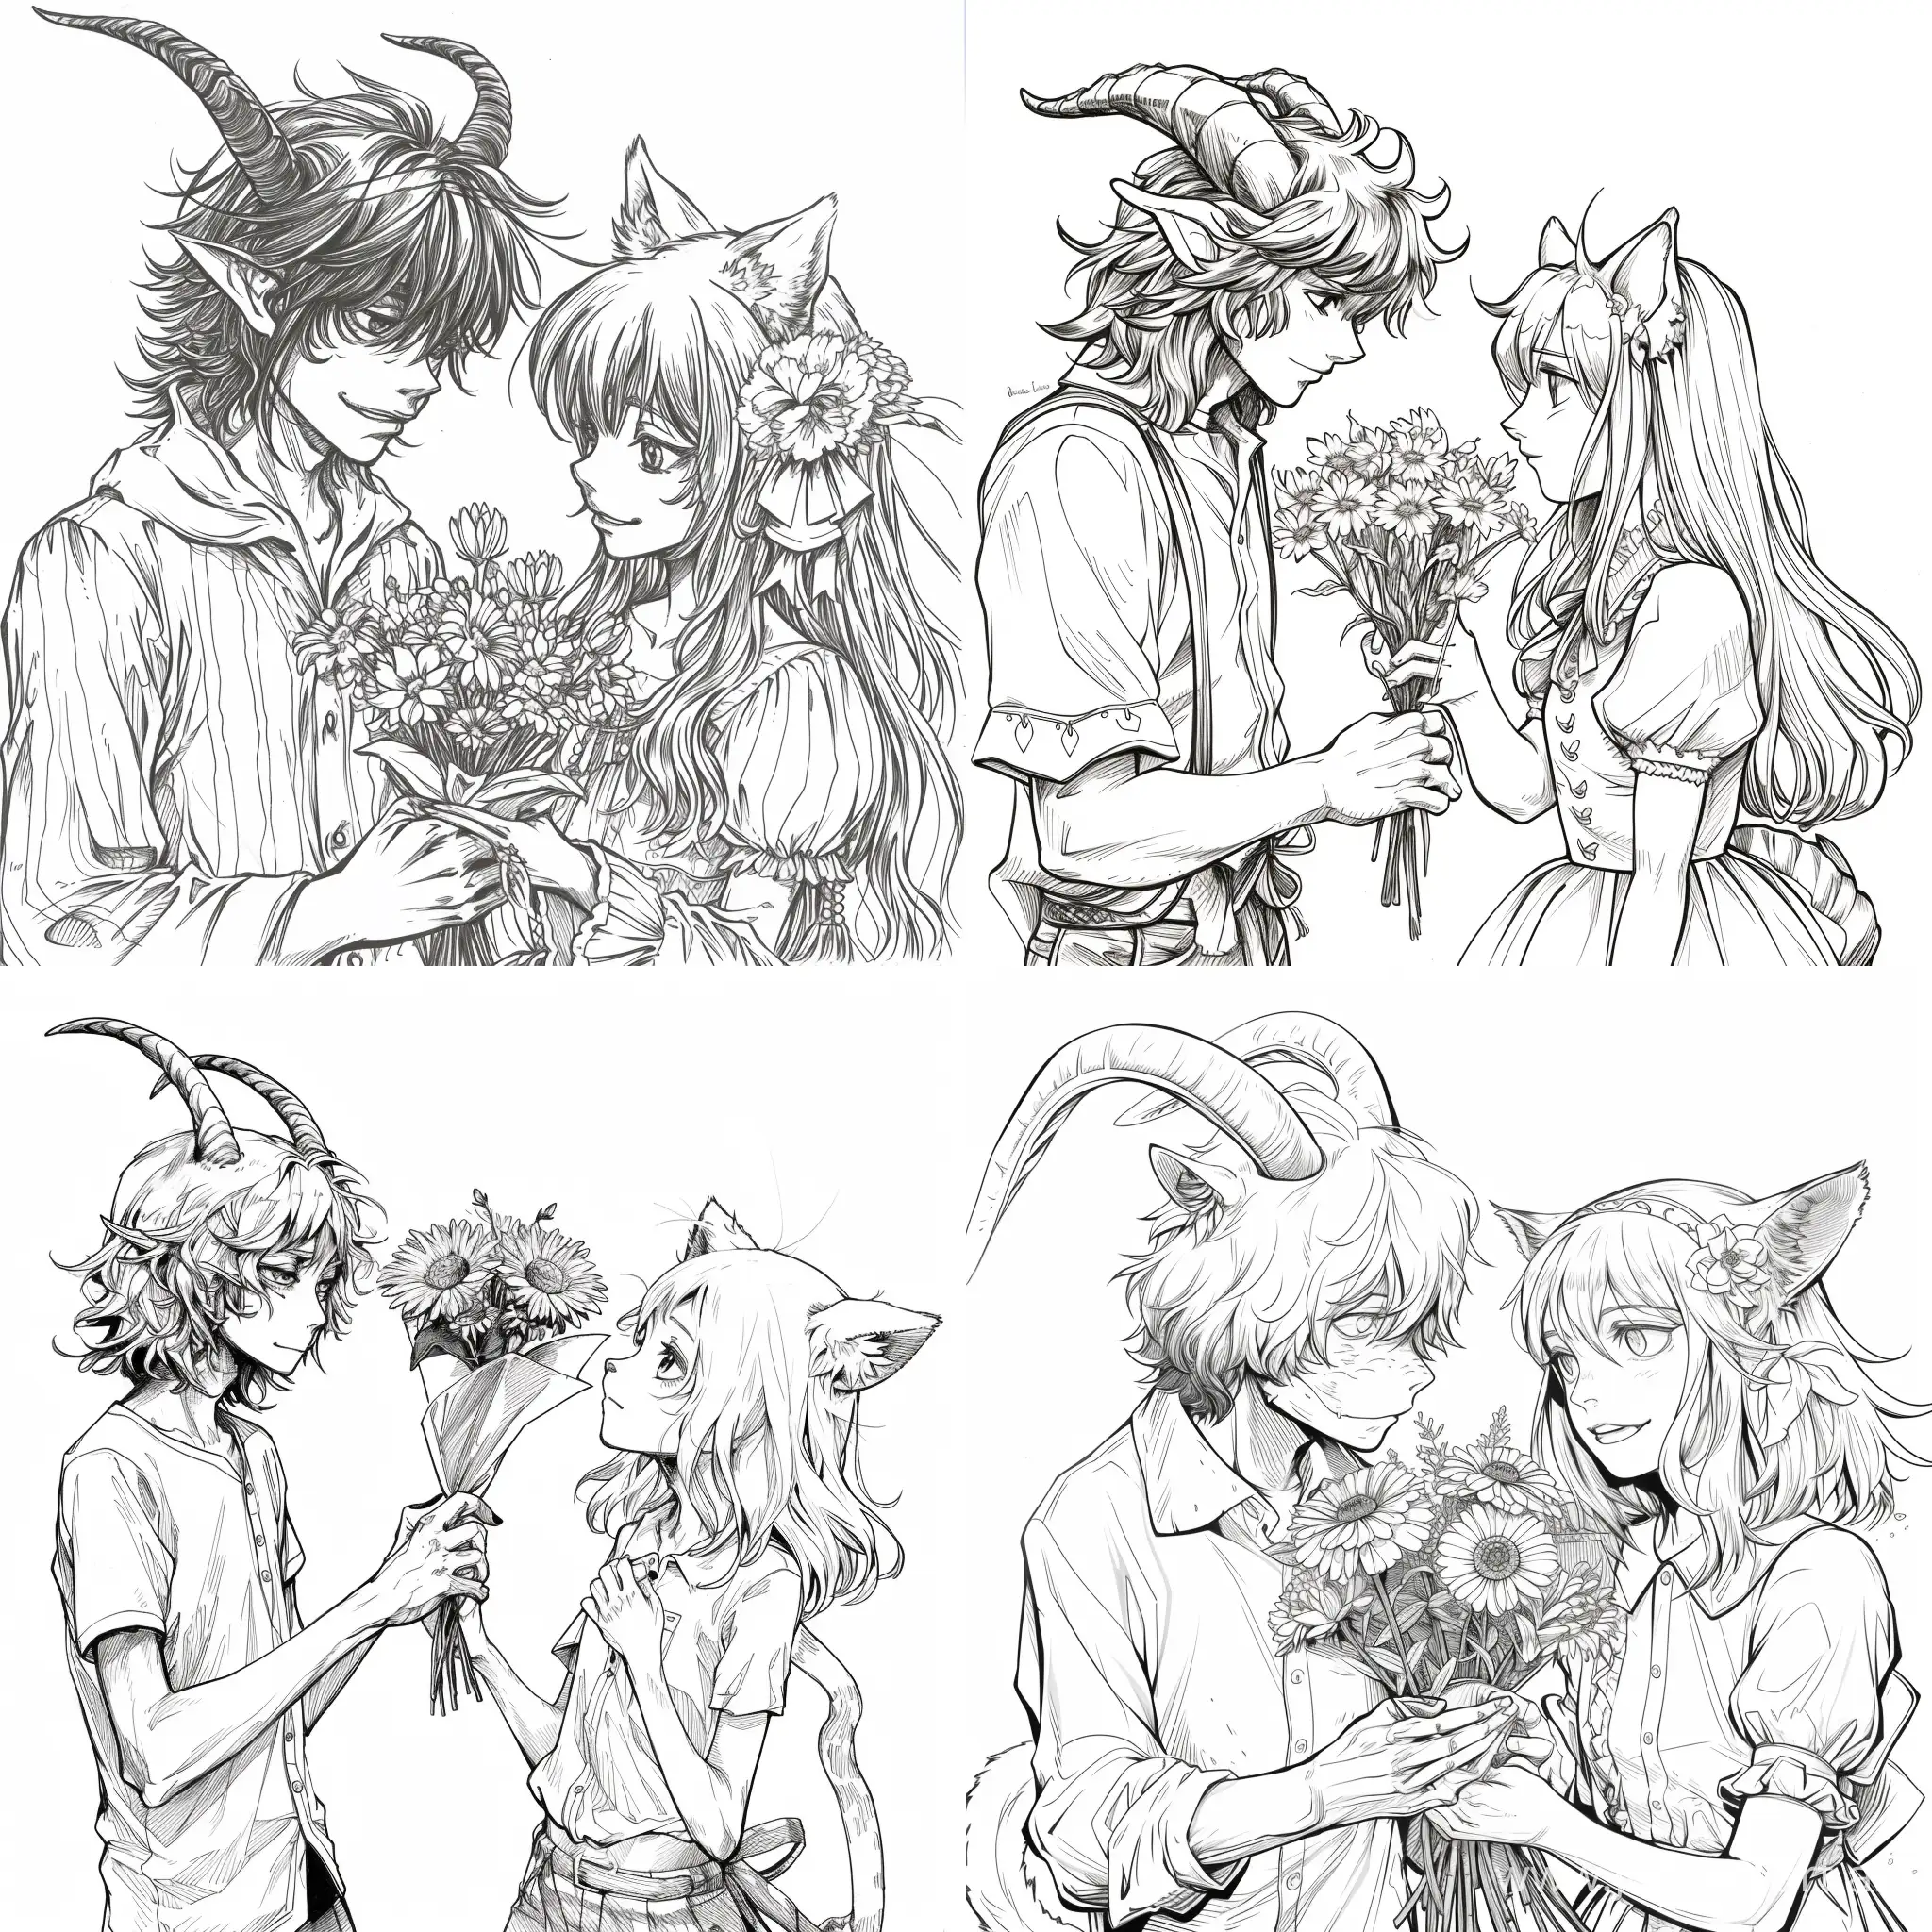 Whimsical-Anime-Scene-GoatHorned-Character-Presenting-Flowers-to-a-CatGirl-in-Monochrome